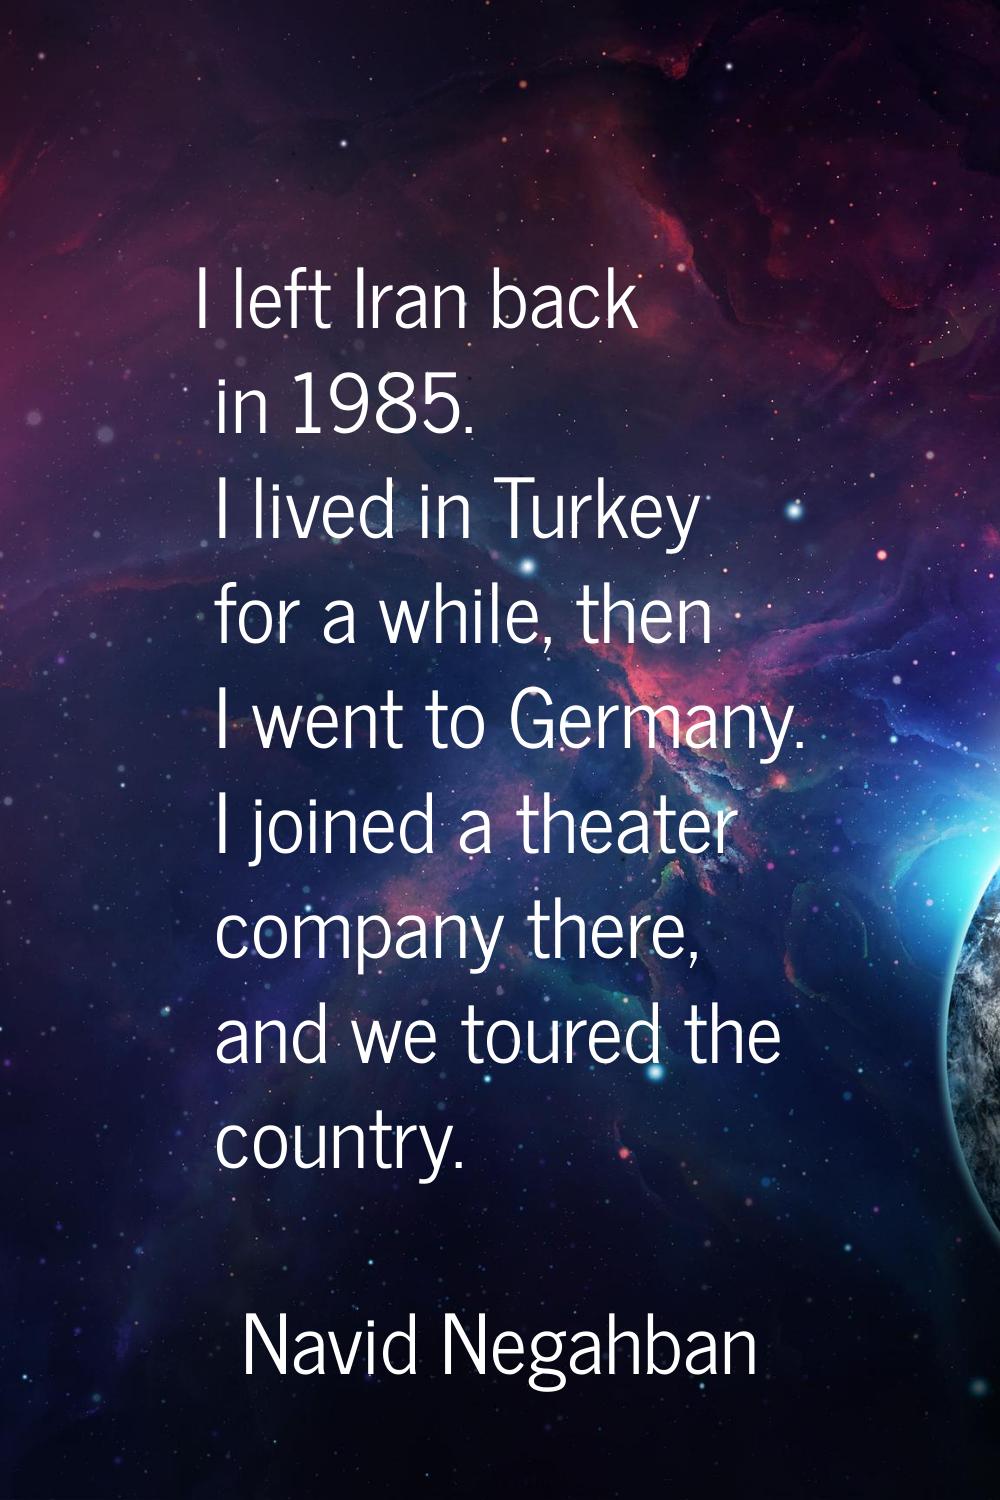 I left Iran back in 1985. I lived in Turkey for a while, then I went to Germany. I joined a theater